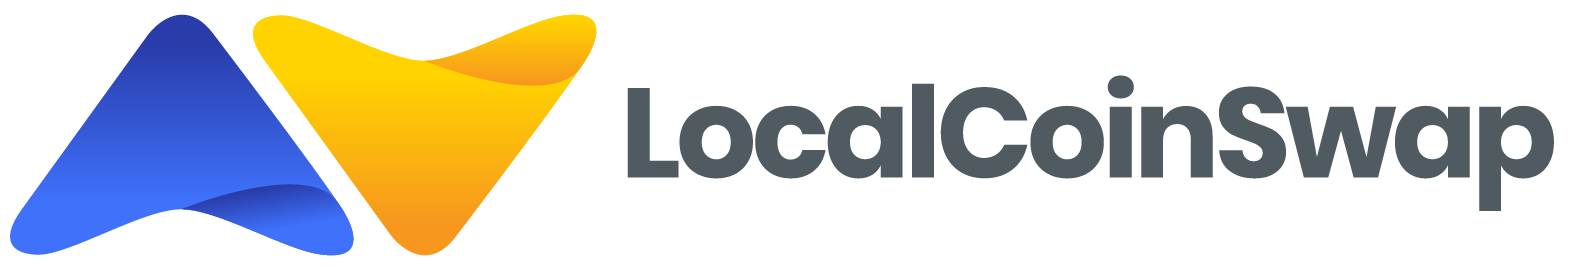 LocalCoinSwap News And Blog Review 2021